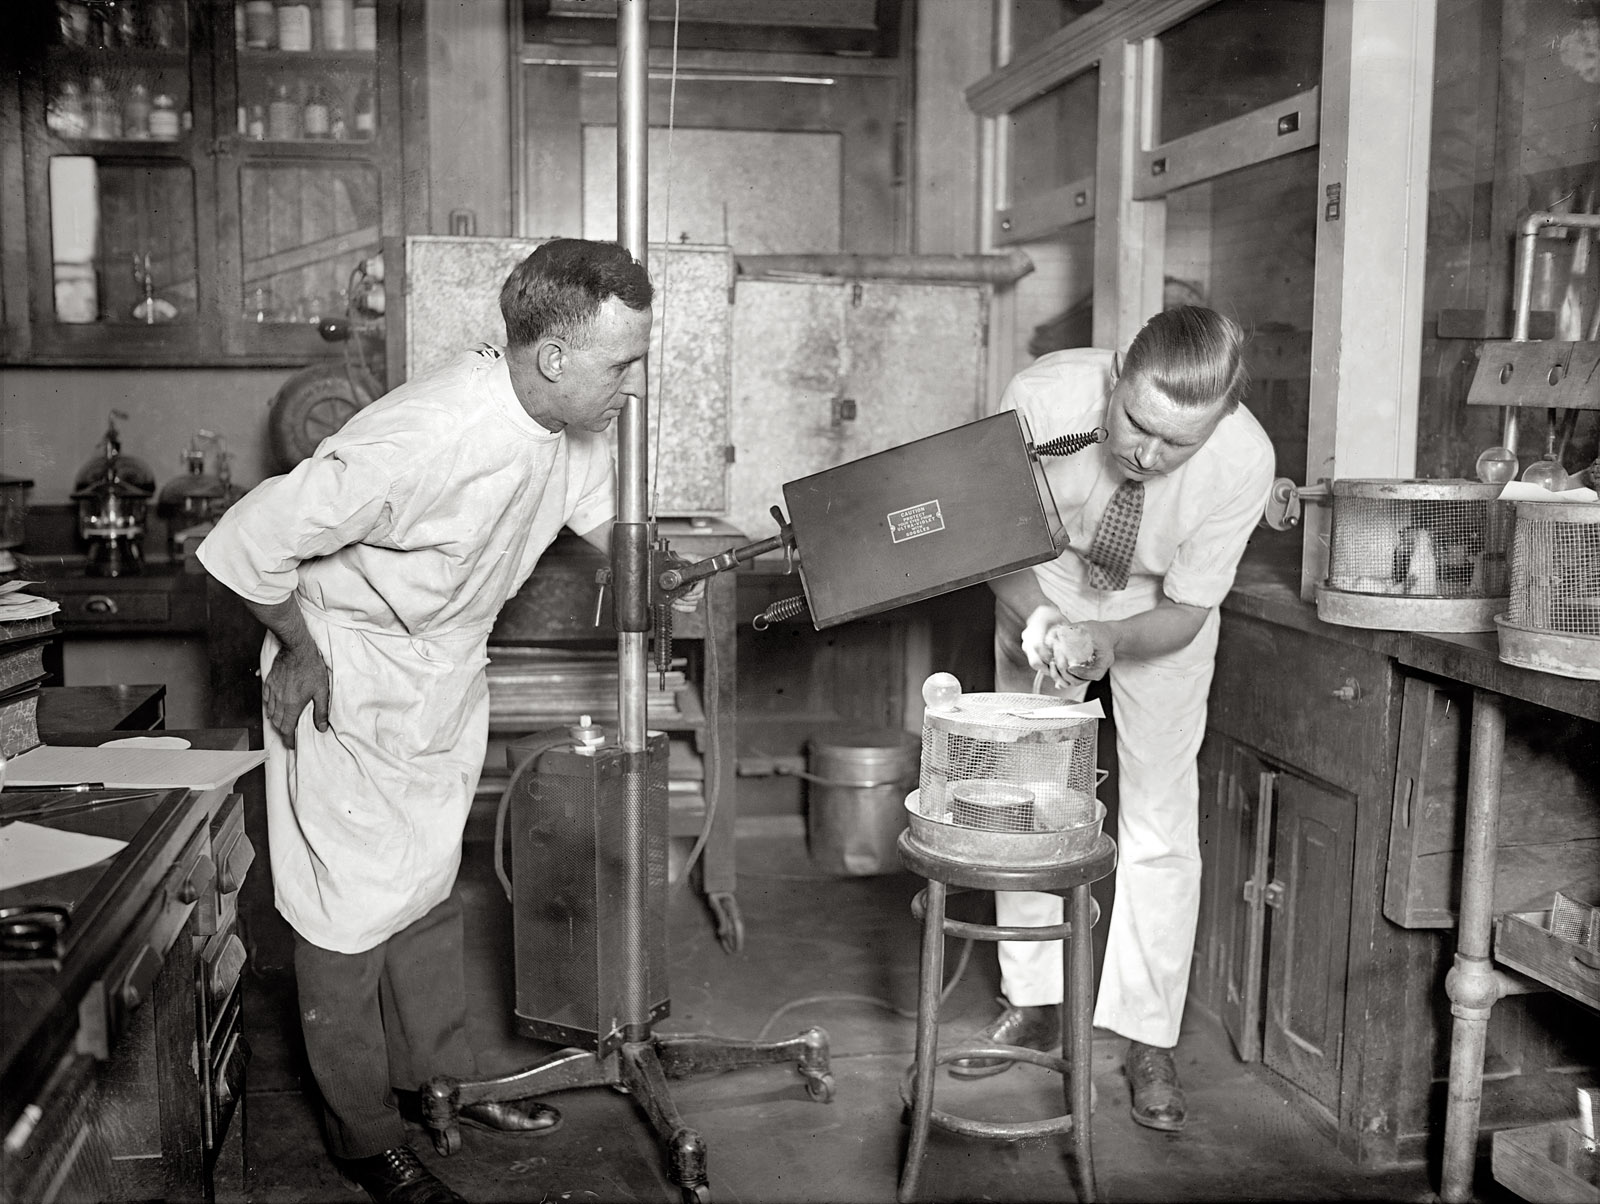 January 13, 1926. "Violet Ray treatment on white rats at Agriculture Dept." National Photo Company Collection glass negative. View full size.